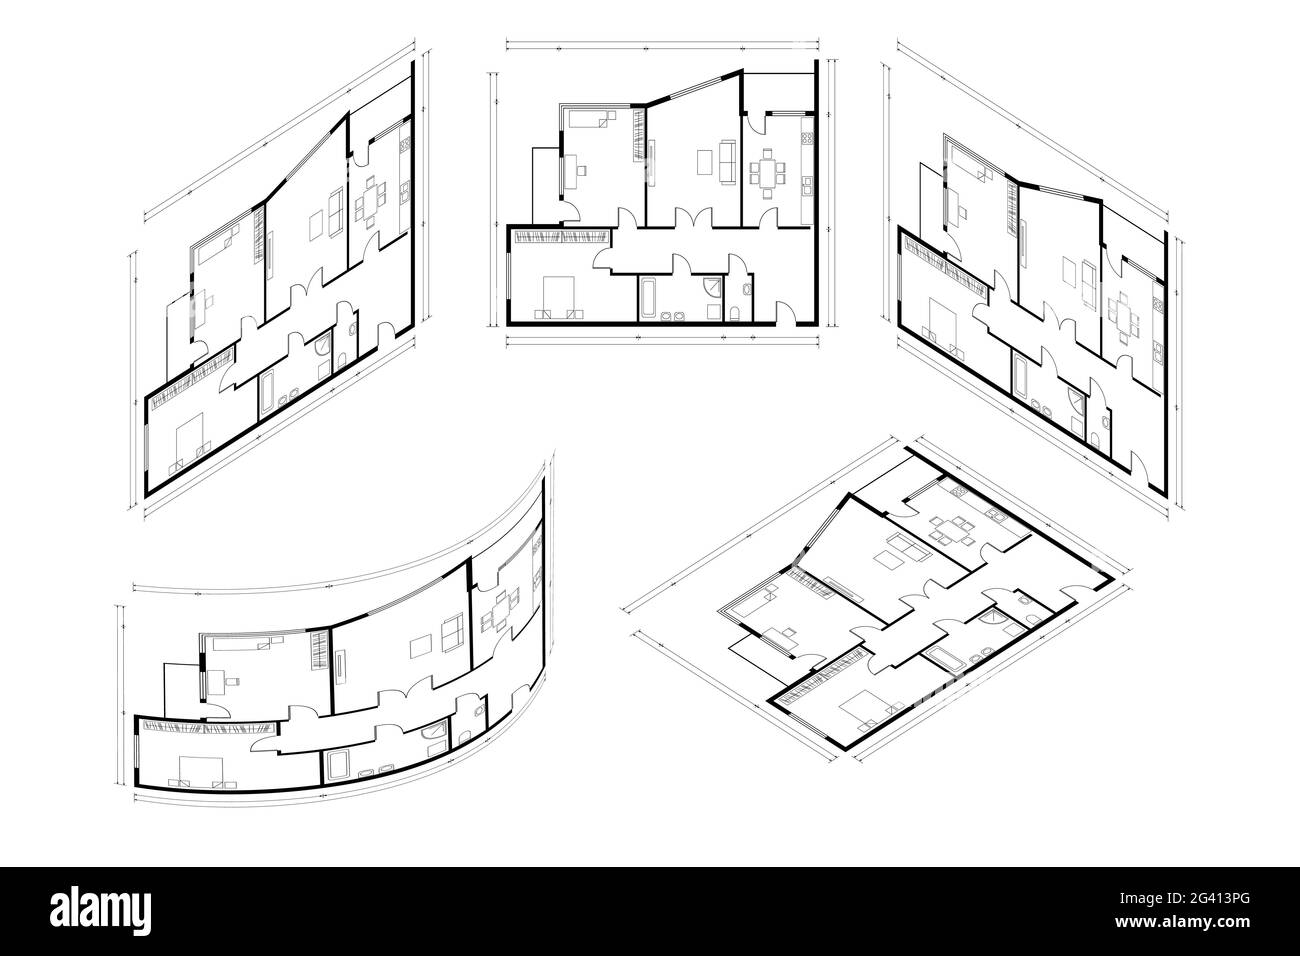 Isometric Architect Blueprint Vector Plan of Home. Blueprint House Plan Drawing. Professional Architectural Illustration Sketch Home. Stock Vector